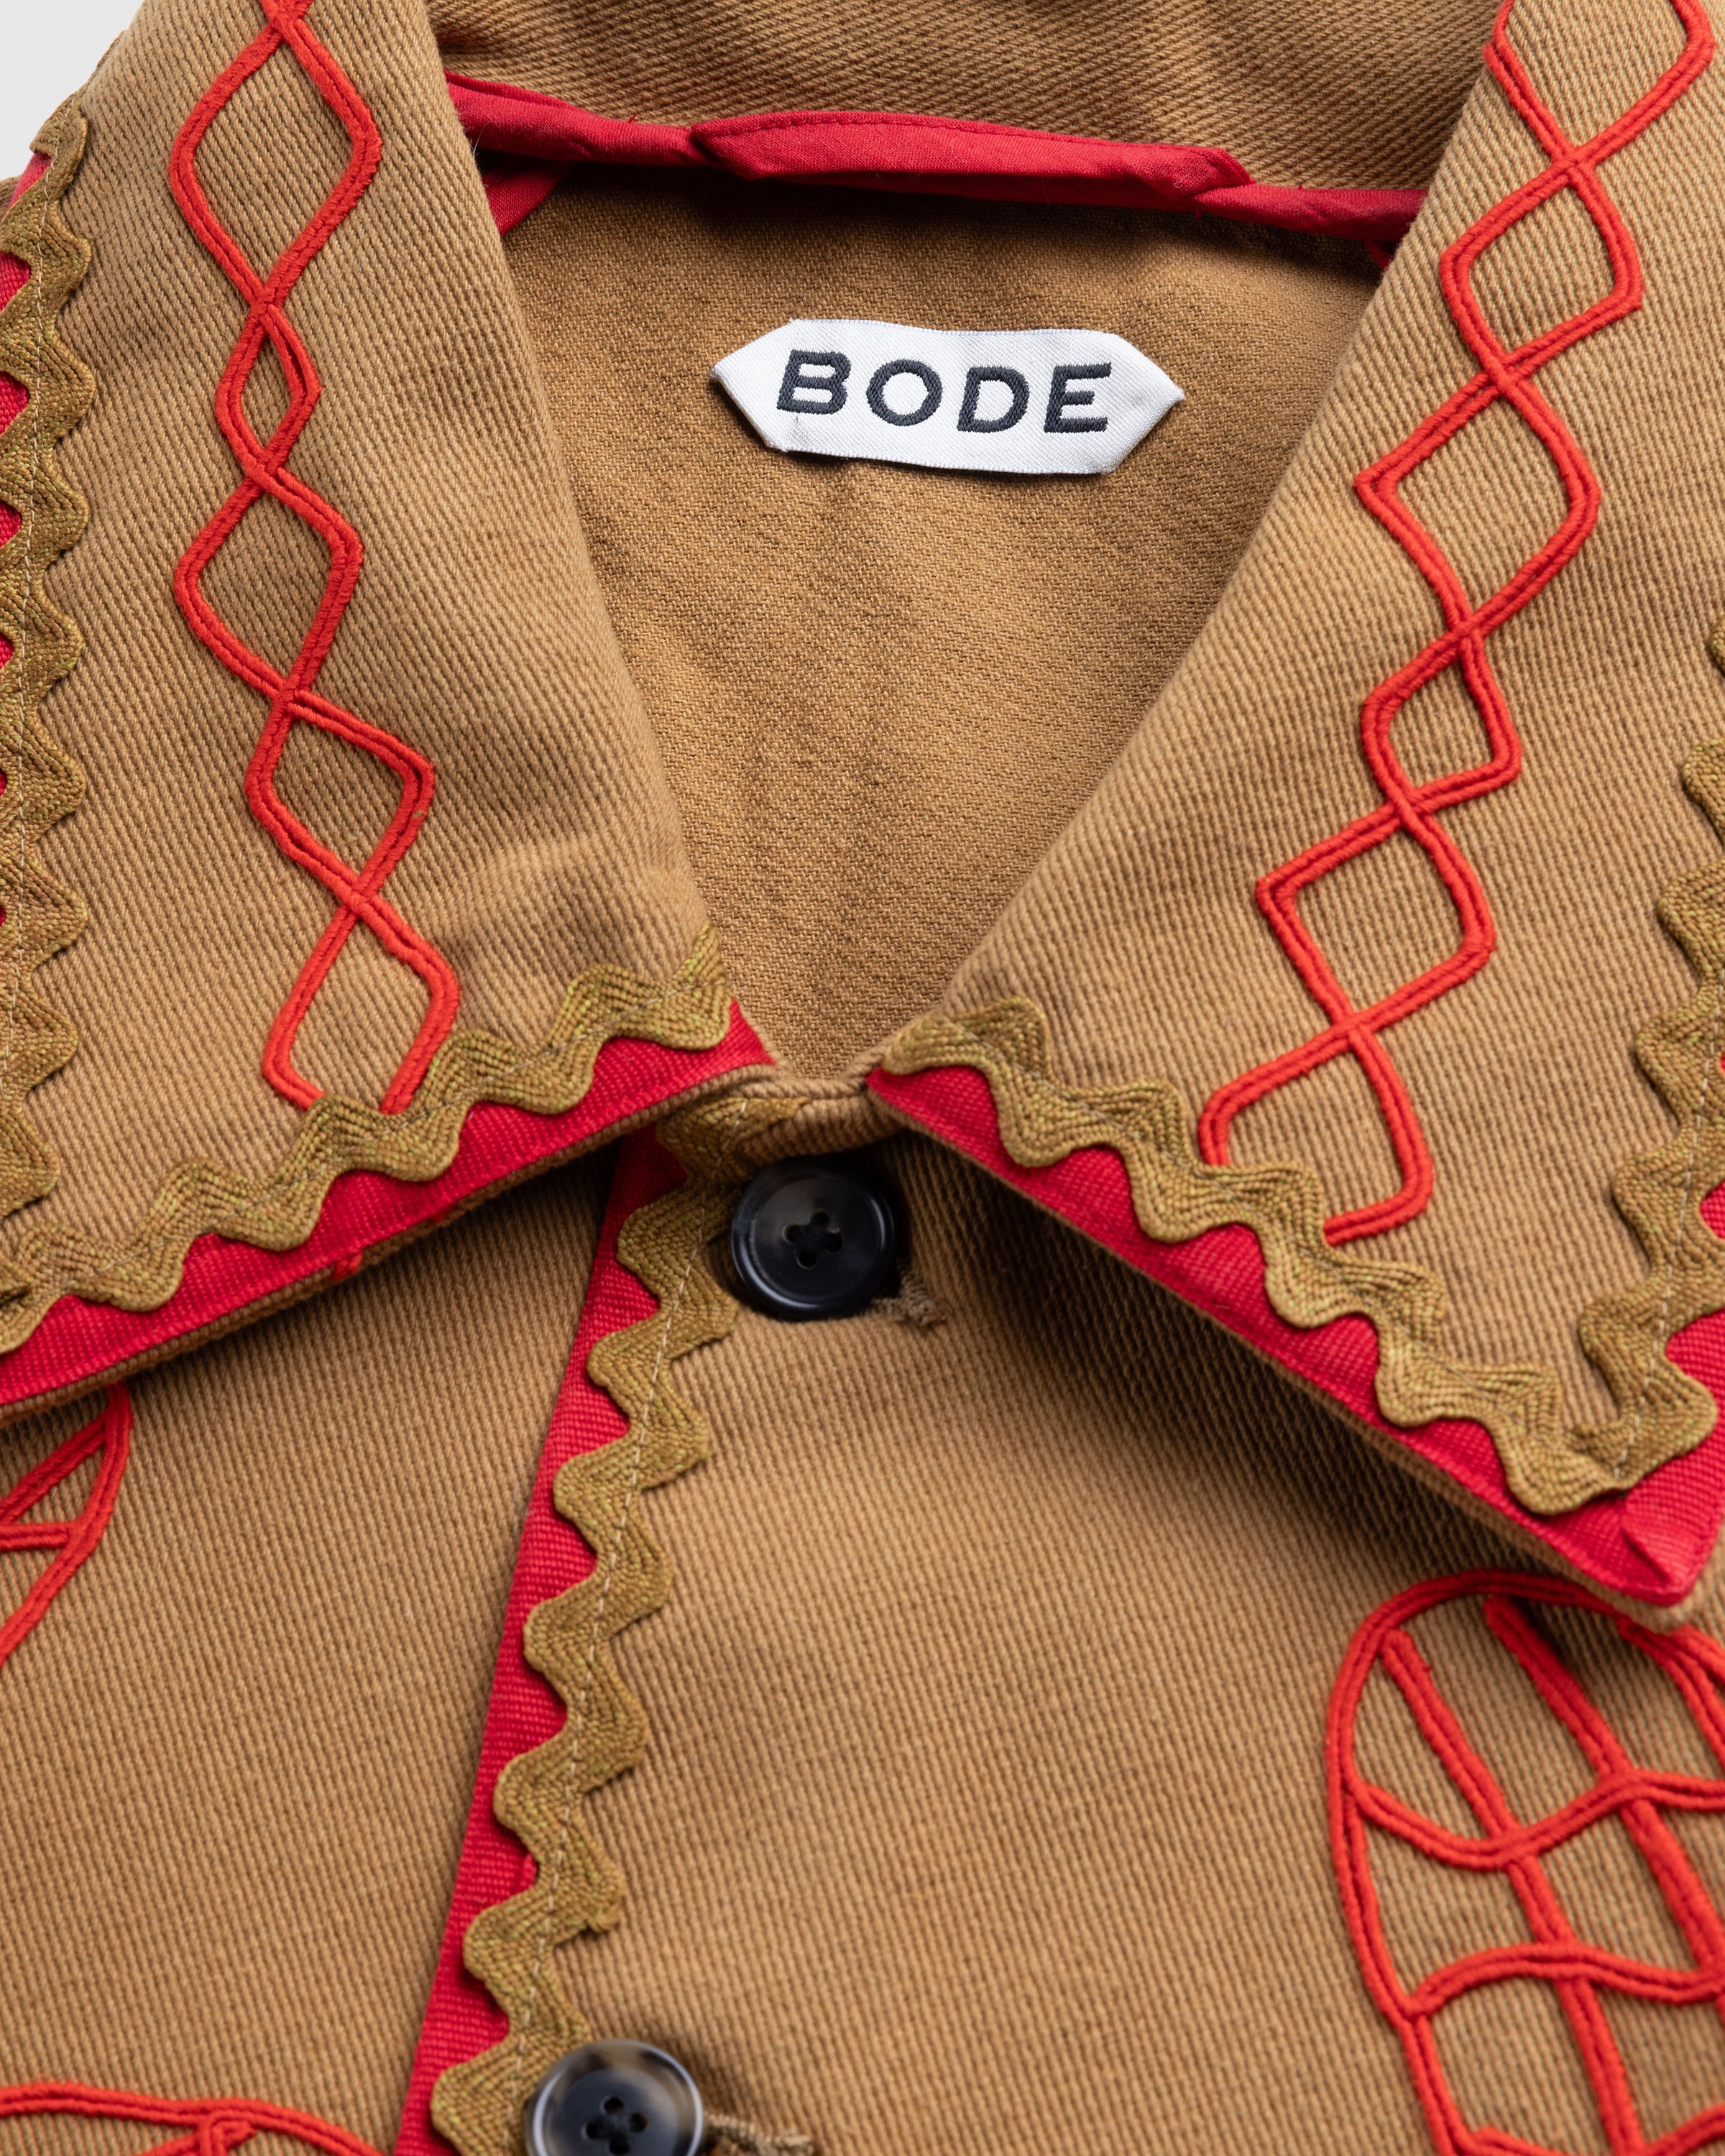 Bode - Field Maple Coat Brown/Red - Clothing - Multi - Image 5